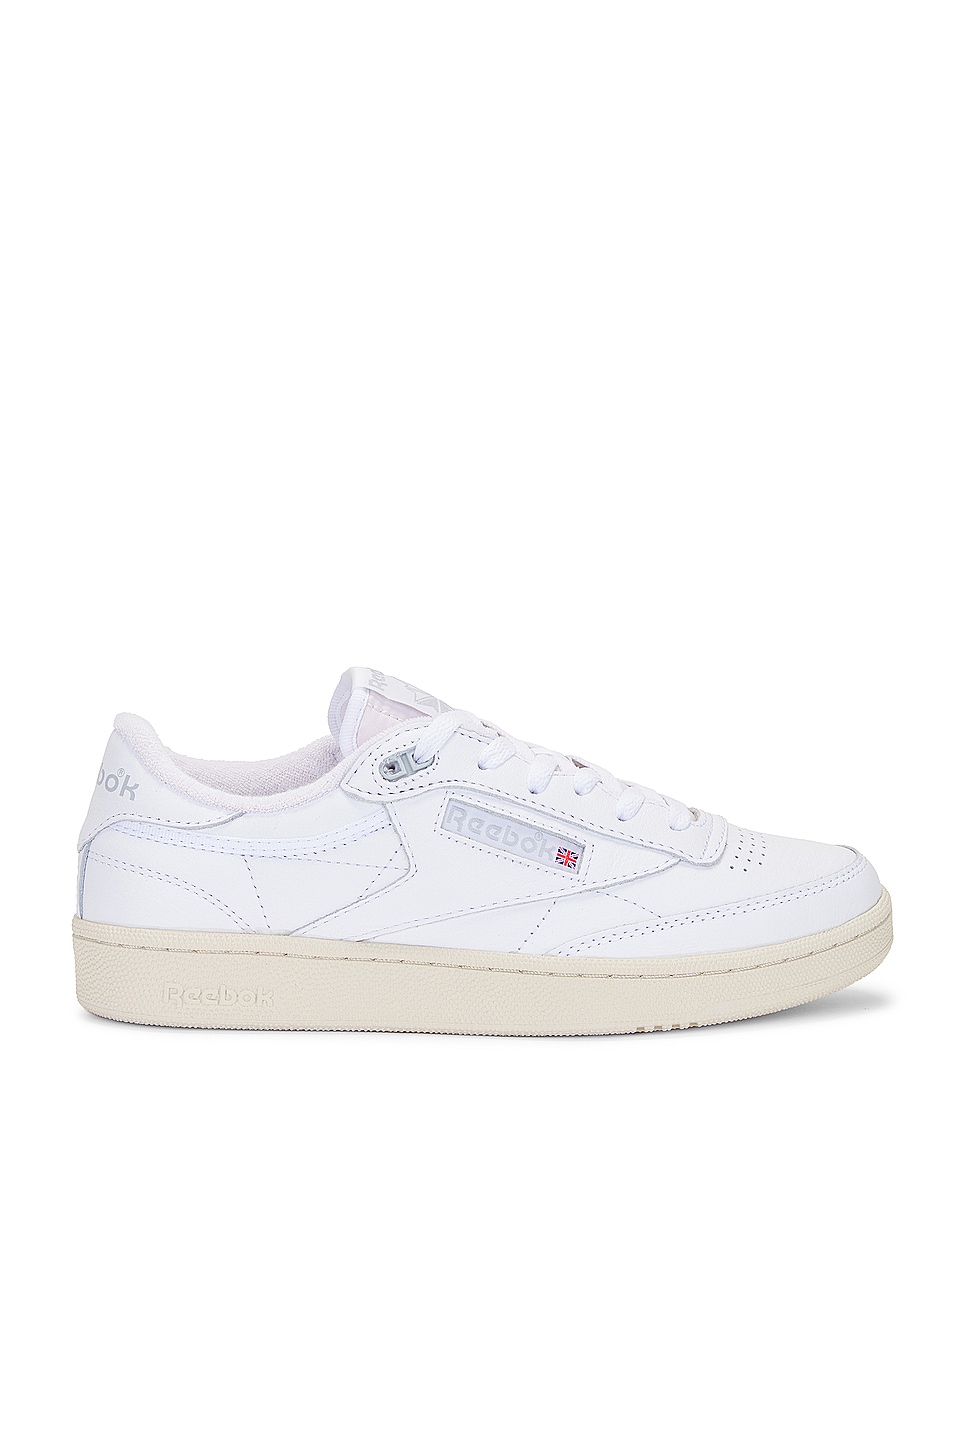 Image 1 of Reebok Club C 85 Vintage Sneaker in White, Purgry, & Paper White